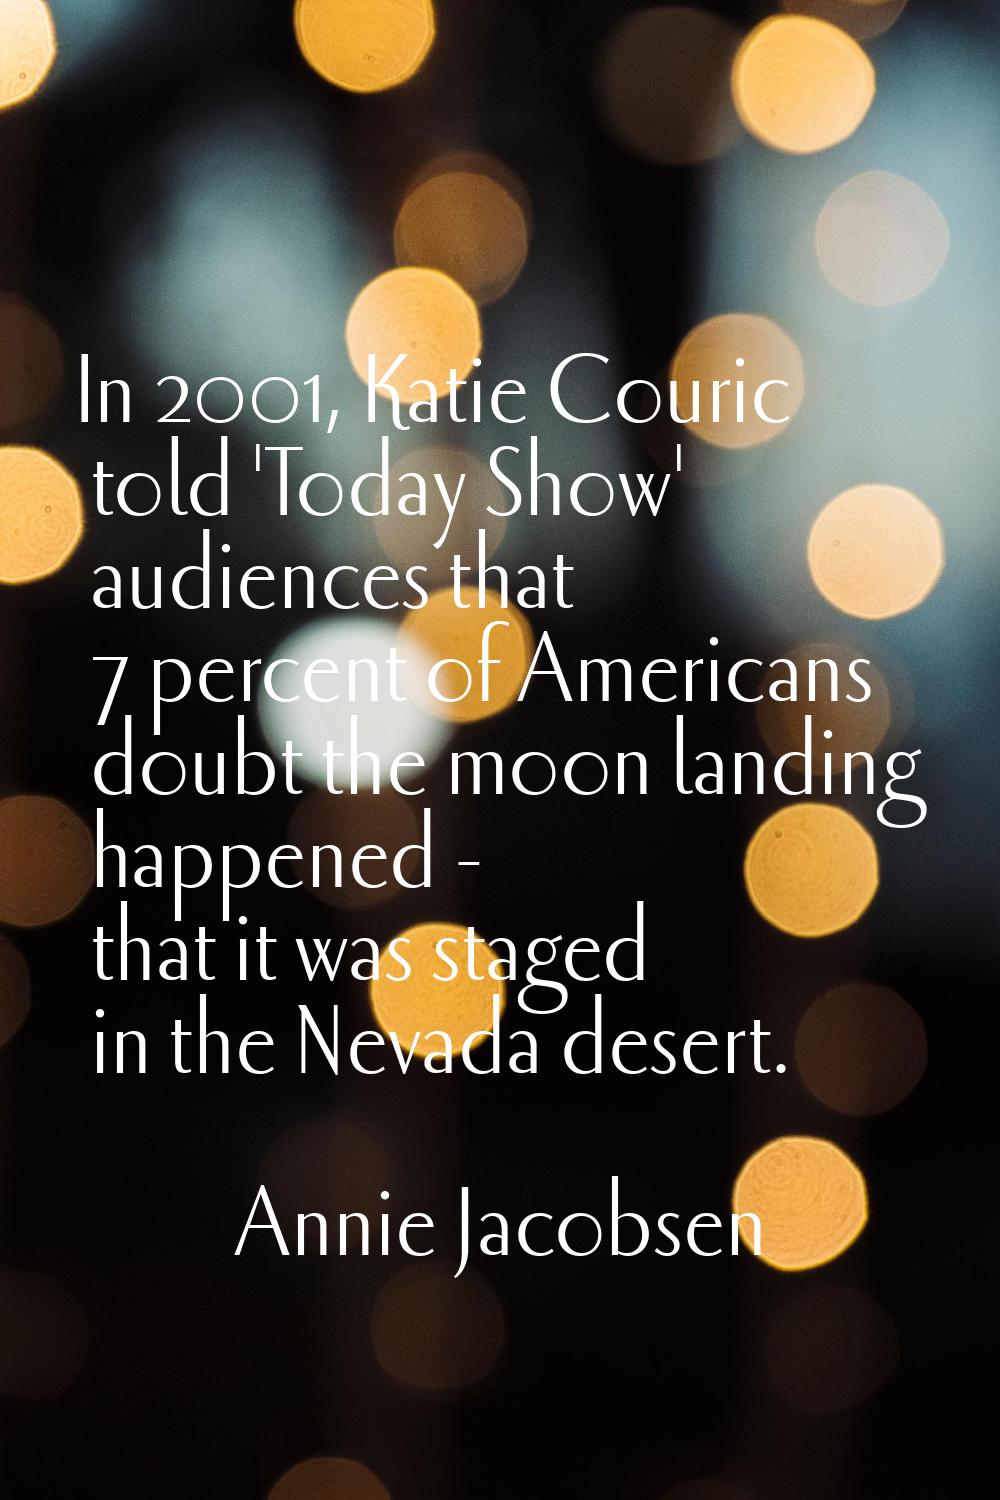 In 2001, Katie Couric told 'Today Show' audiences that 7 percent of Americans doubt the moon landin